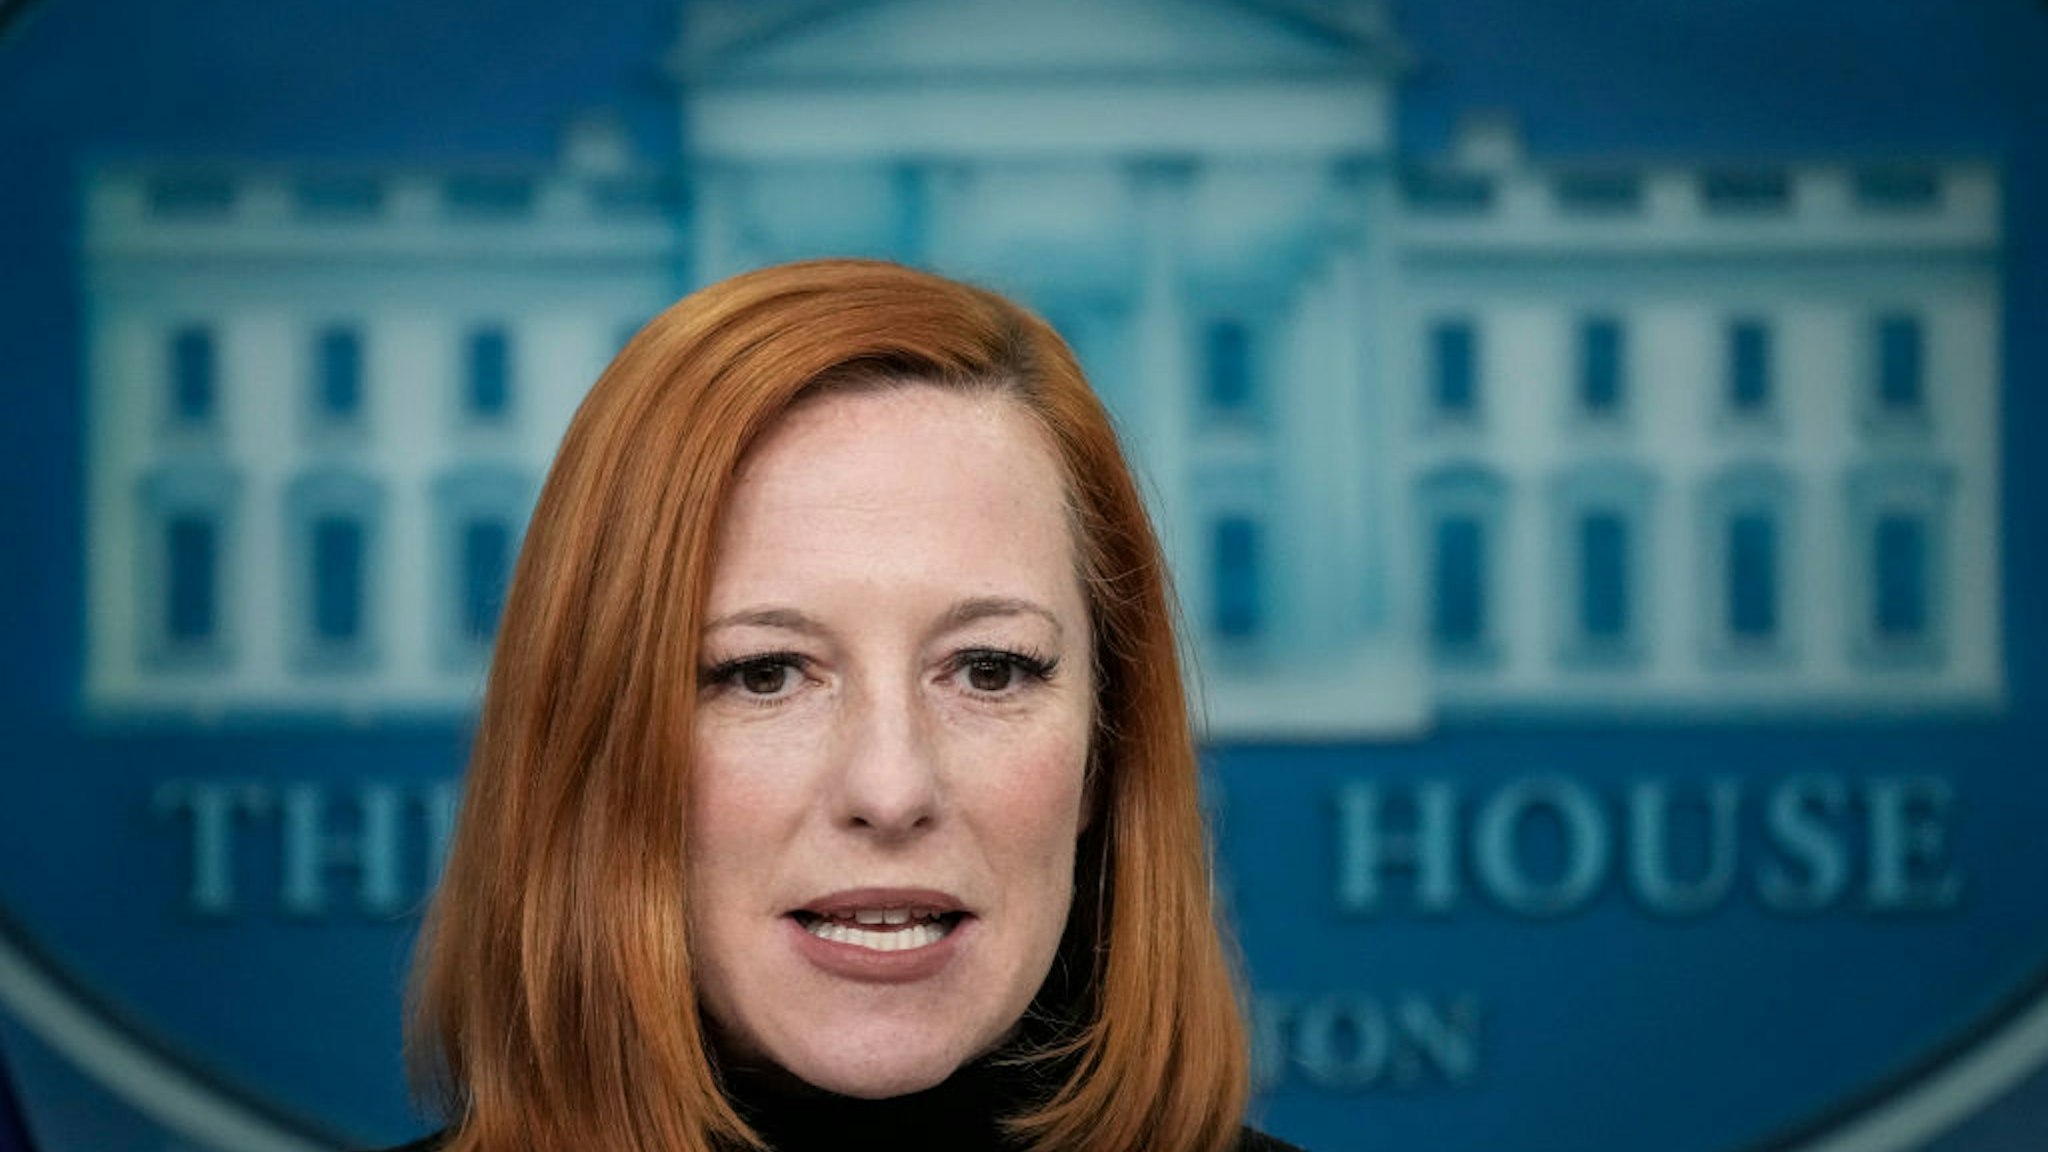 WASHINGTON, DC - APRIL 18: White House Press Secretary Jen Psaki speaks during the daily press briefing at the White House on April 18, 2022 in Washington, DC. The Easter Egg Roll tradition returns this year after being cancelled in 2020 and 2021 due to the COVID-19 pandemic. (Photo by Drew Angerer/Getty Images)